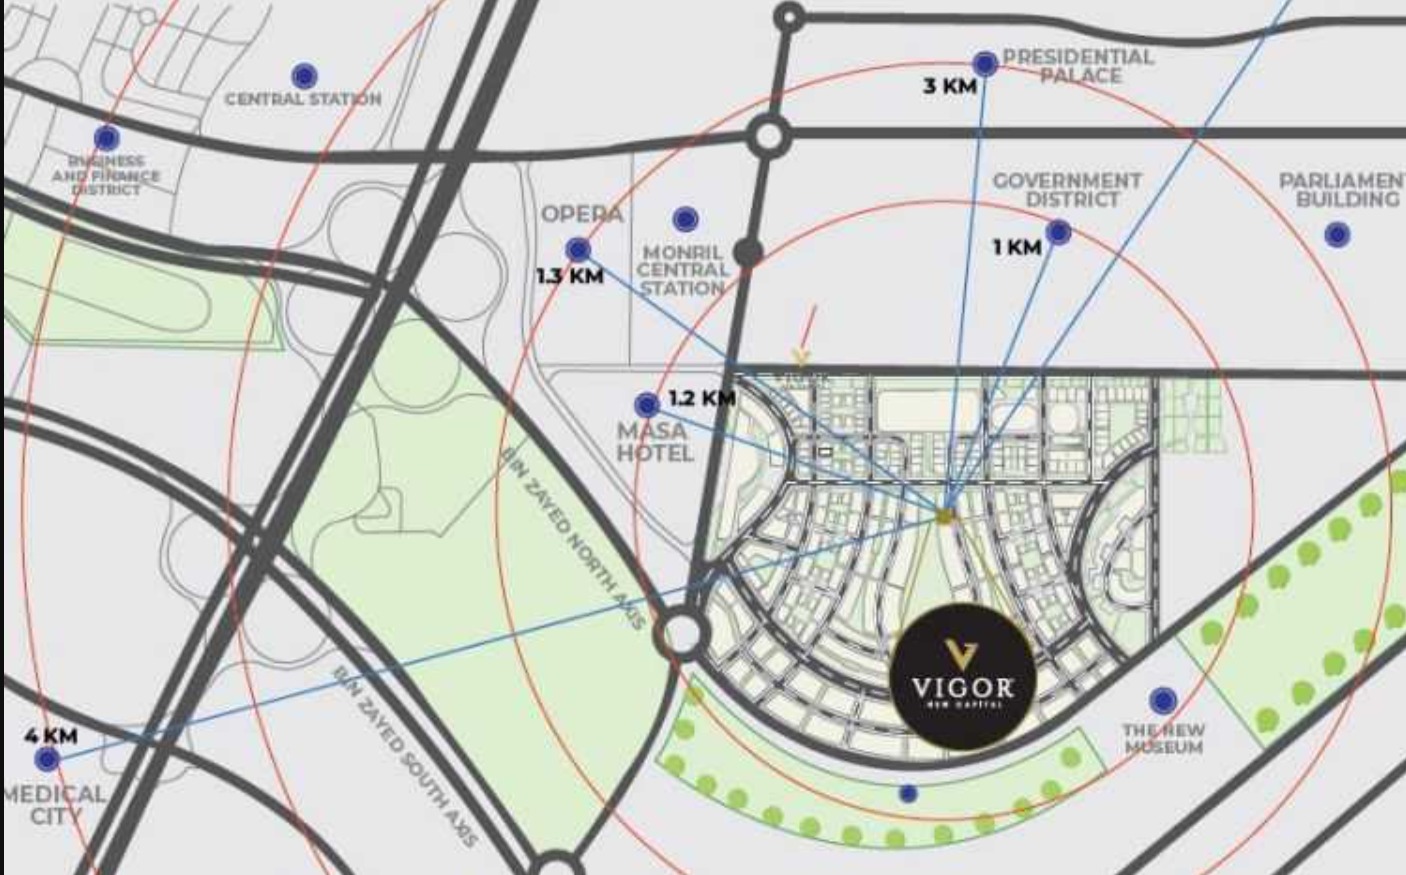 Find out the price of a 64 meter store in Vigor New Capital